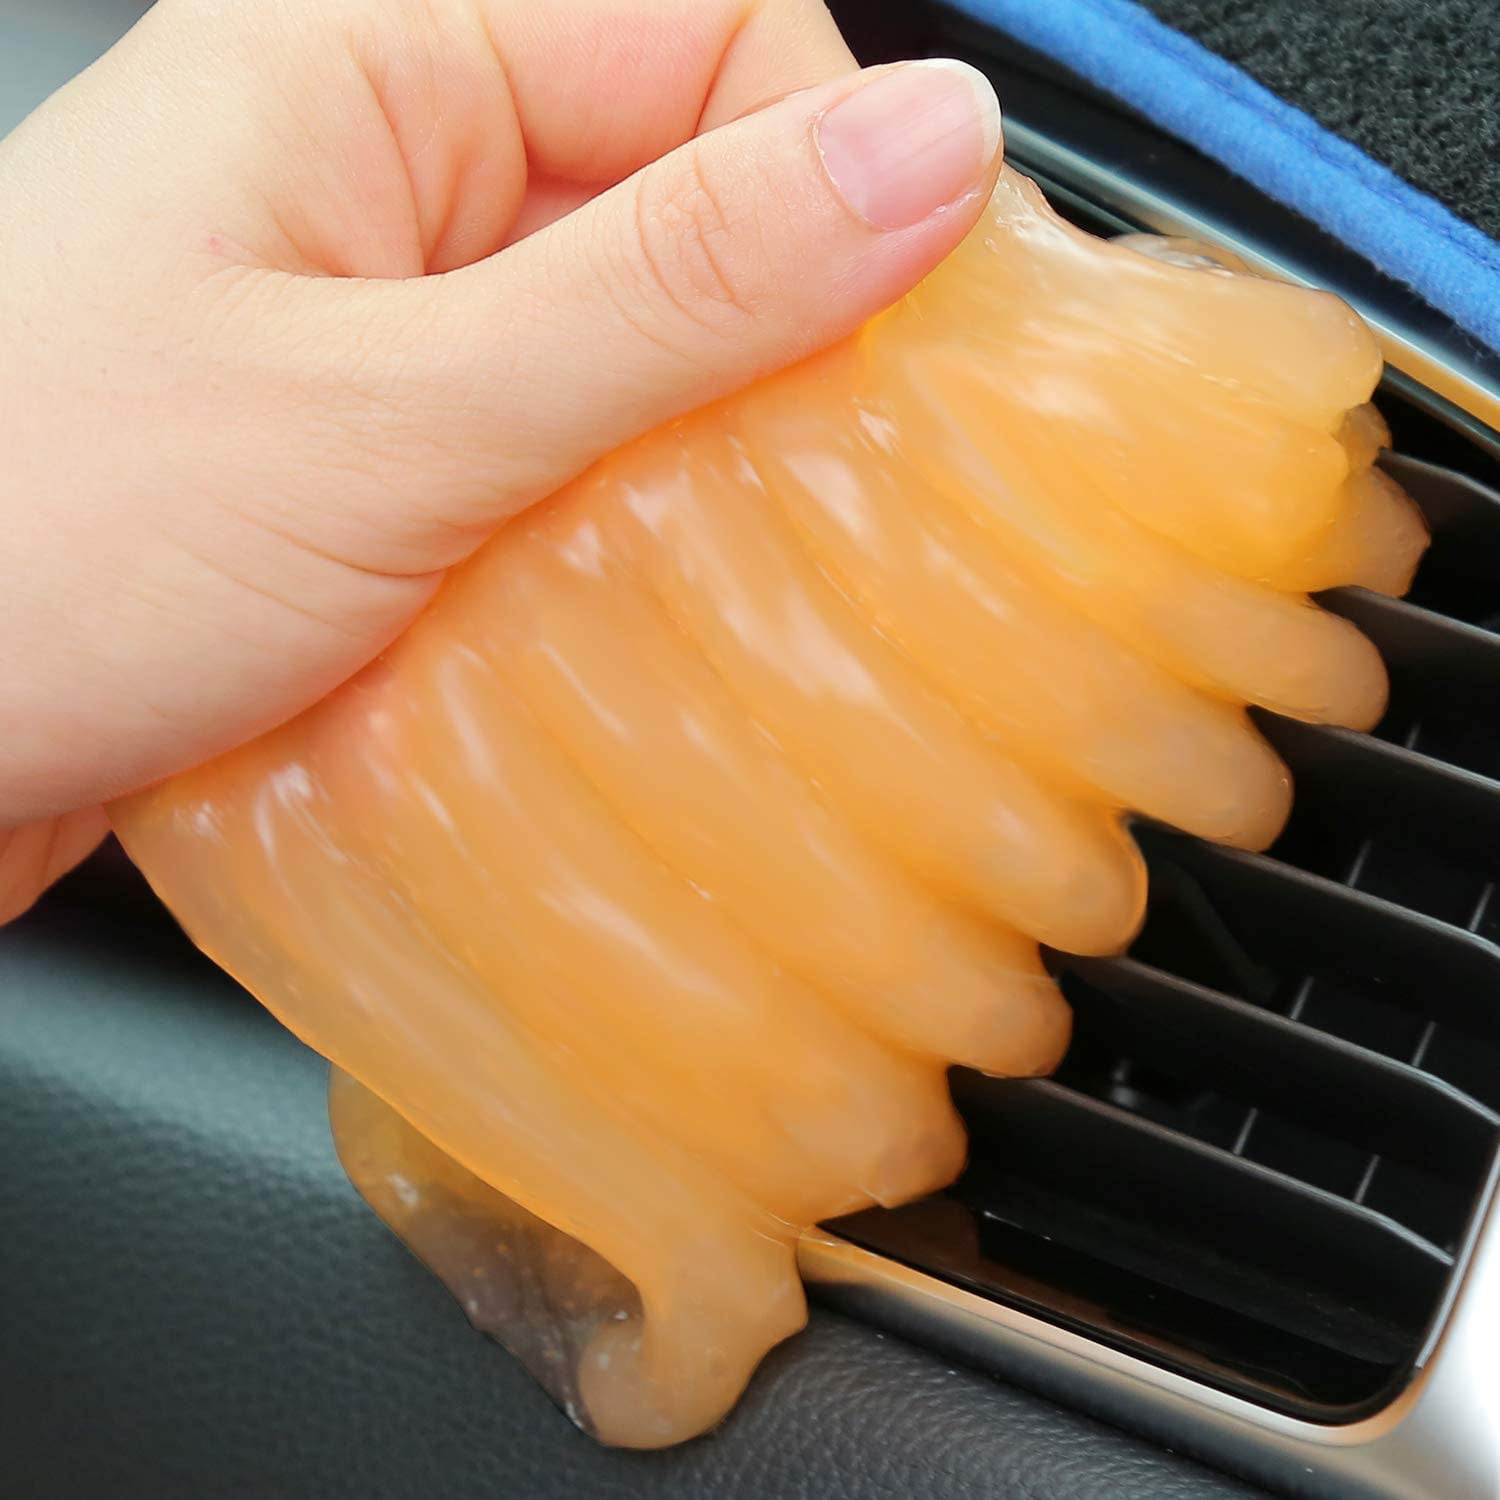 Calculator -Blue Car Interior Cleaner Putty for PC Tablet Laptop Keyboard Cleaning Gel with Cleaning Kit Printers Car Vents 10 Pcs Keyboard Cleaner kit 